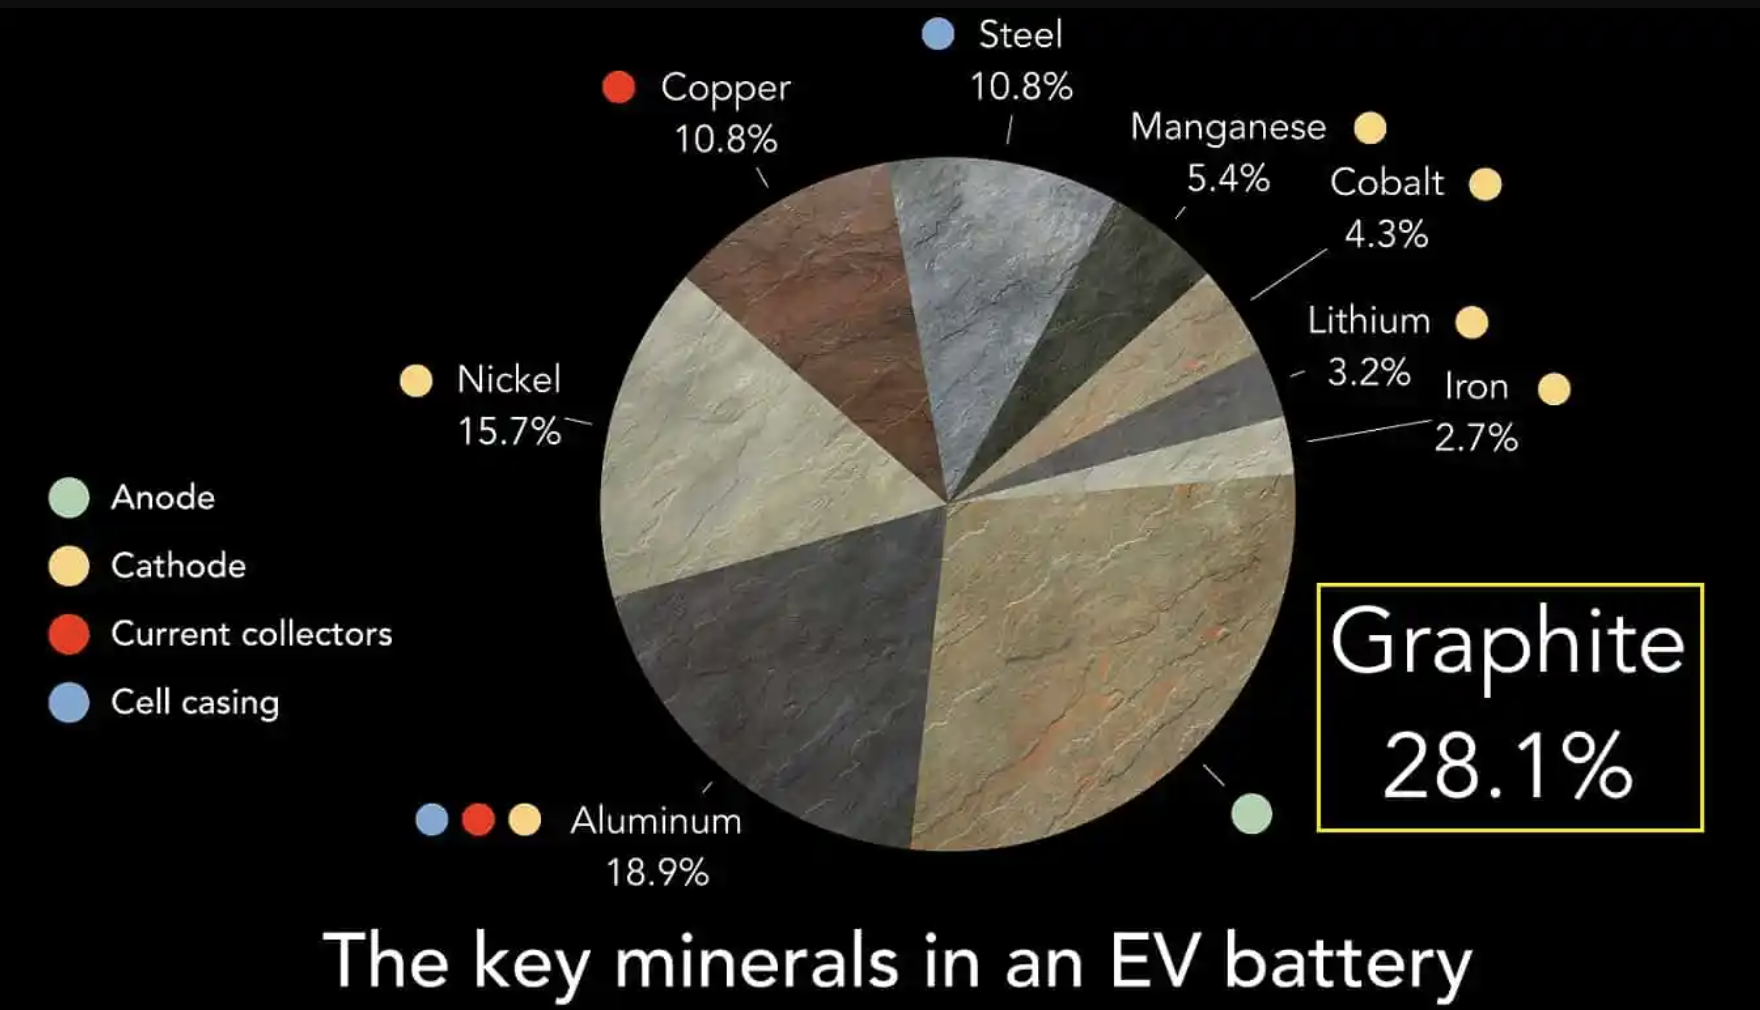 Graphite, Dominated by China, Requires the Largest Production Increase of Any Battery Mineral - IER